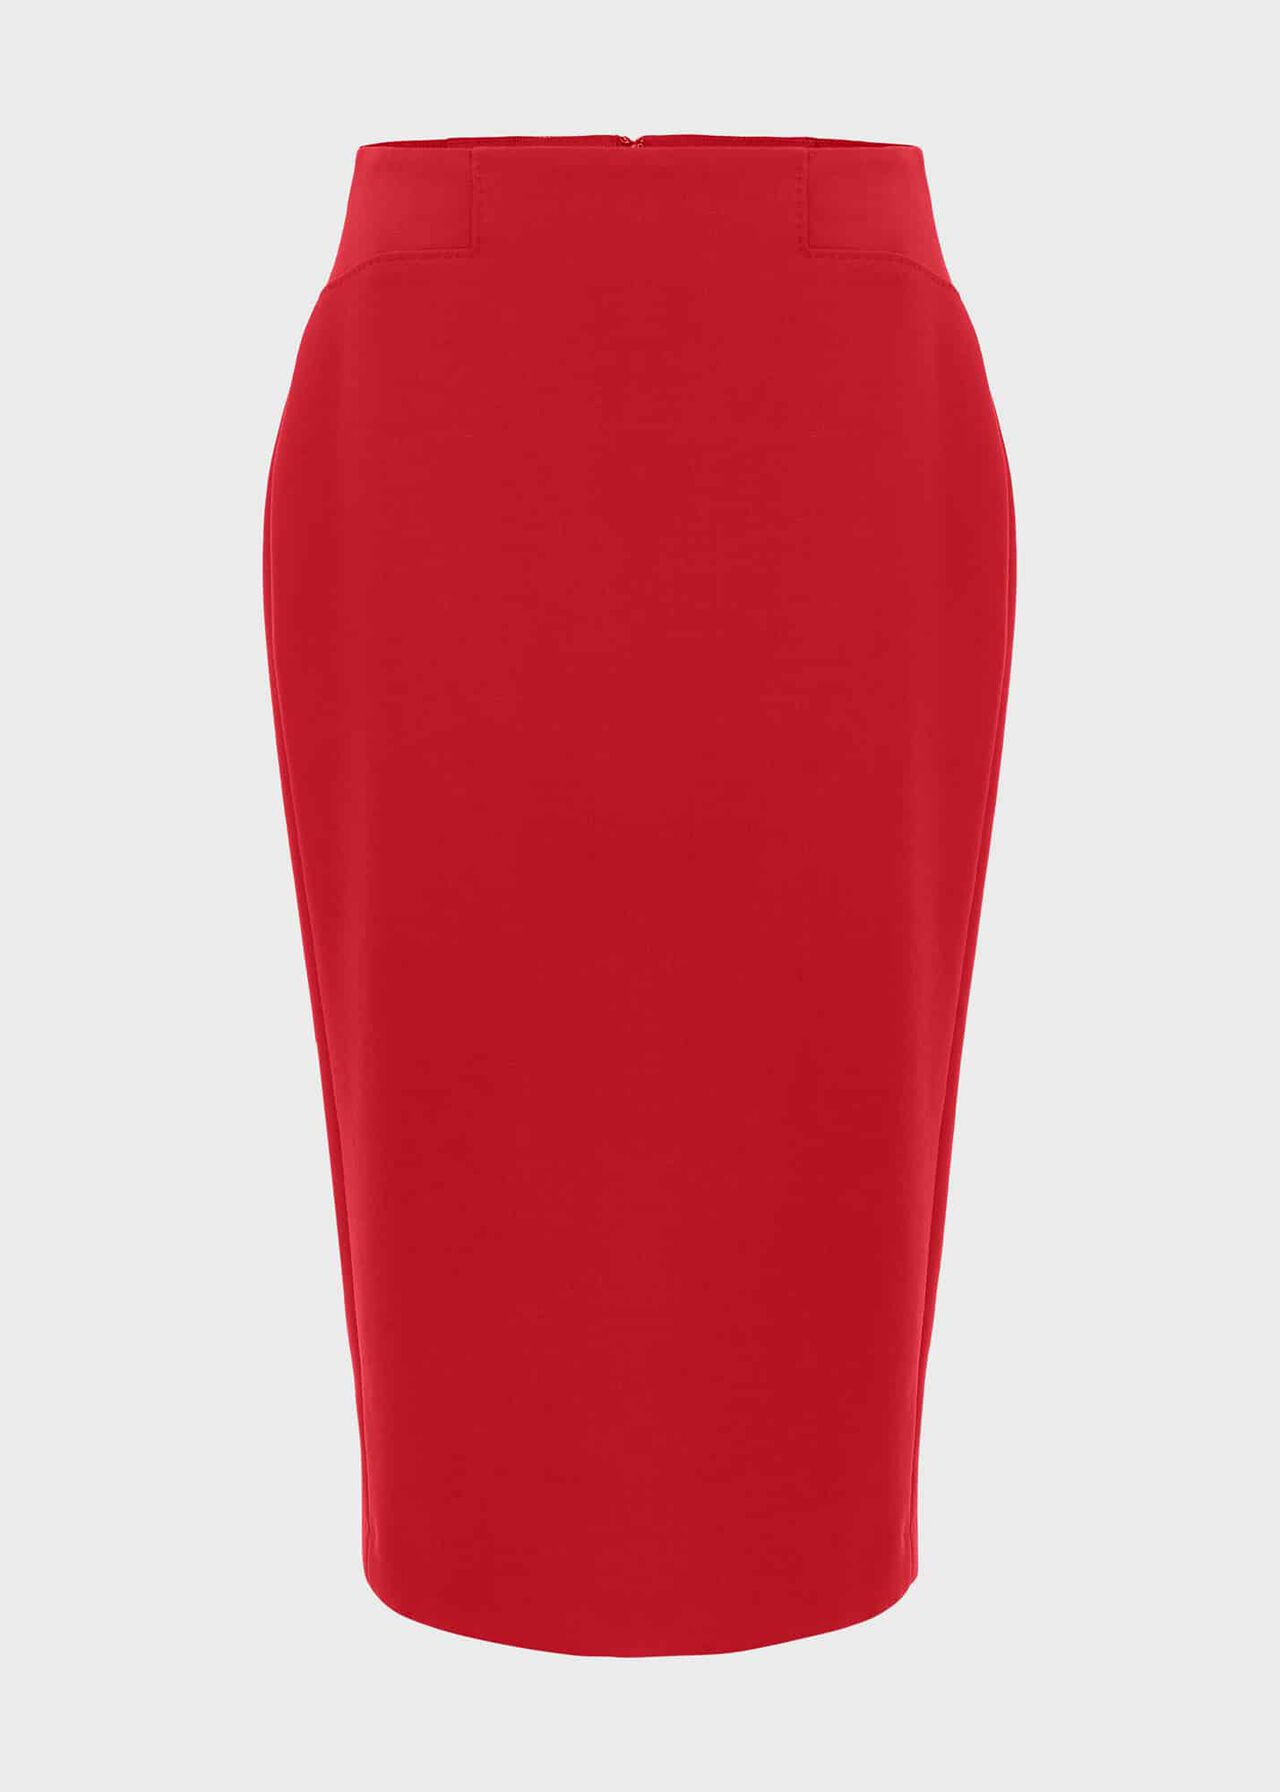 Brielle Skirt, Cherry Red, hi-res